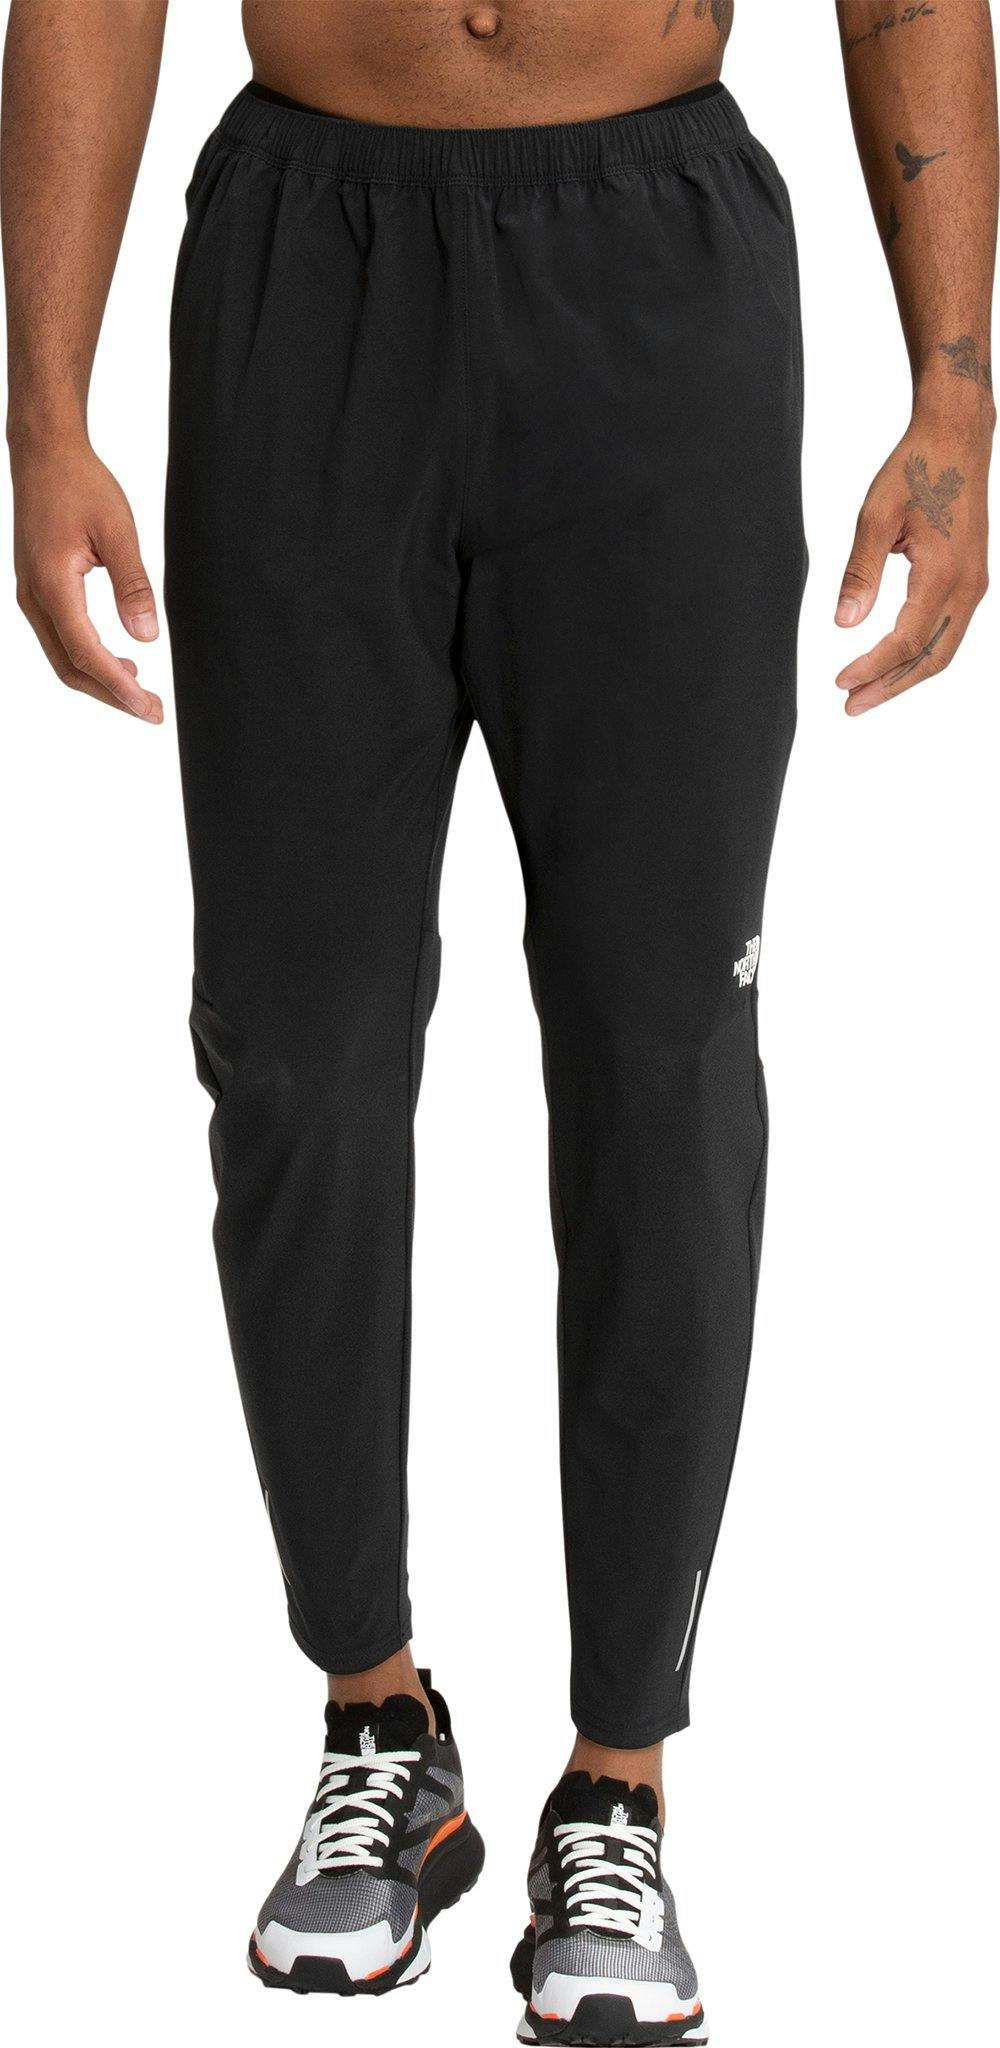 Product image for Movmynt Pant - Men’s